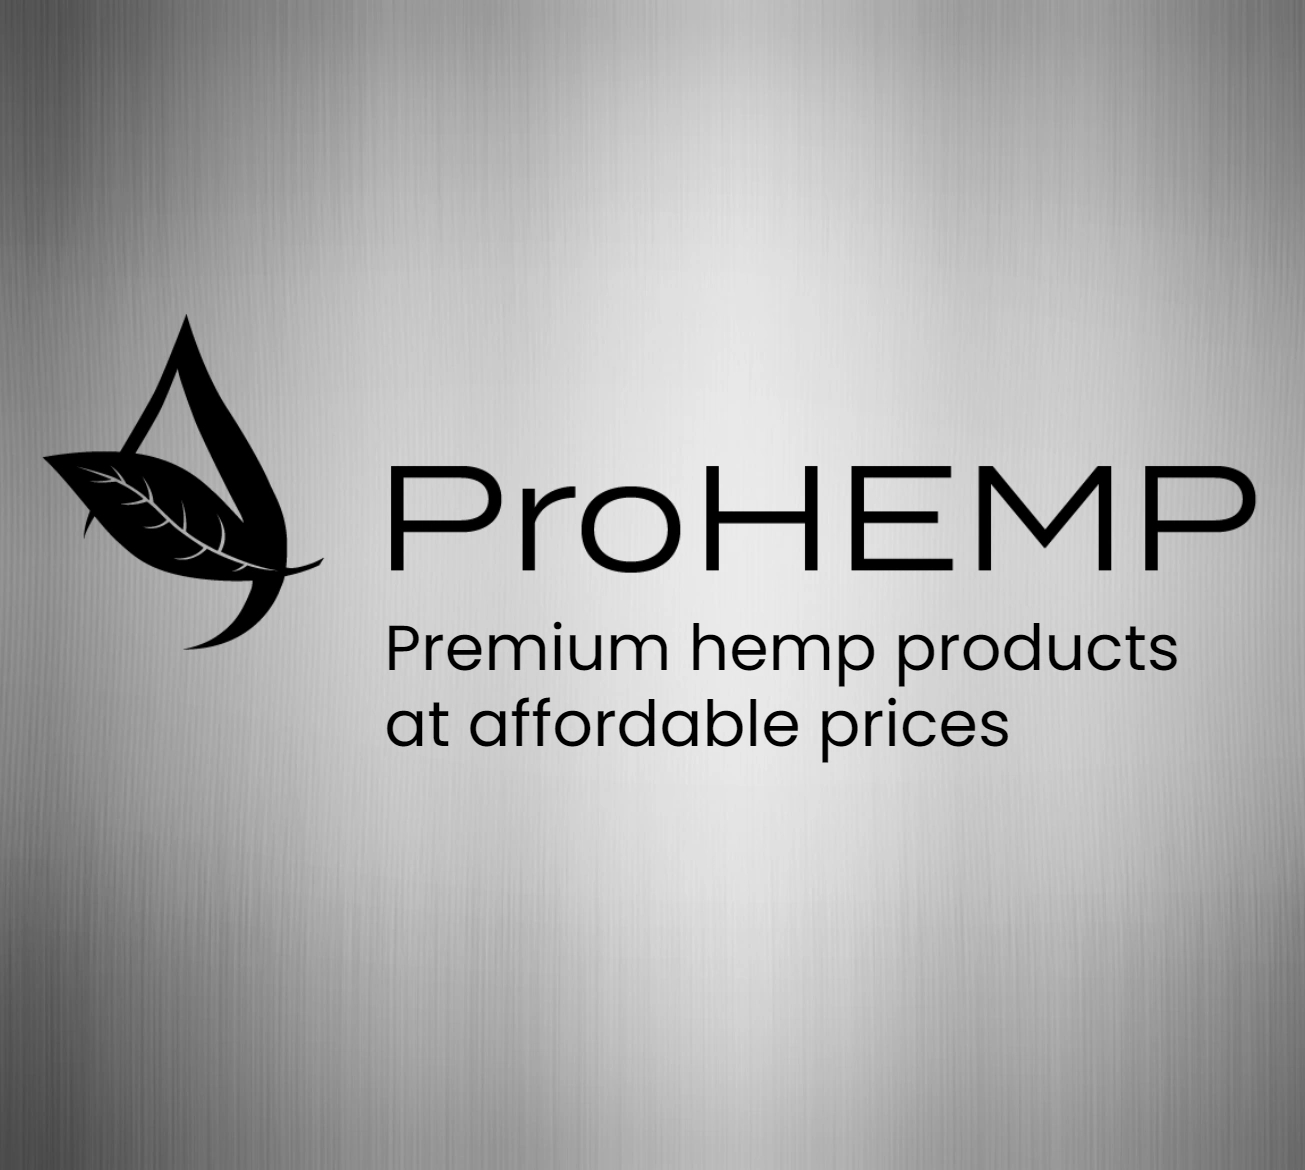 ProHEMP — Premium hemp products at affordable prices